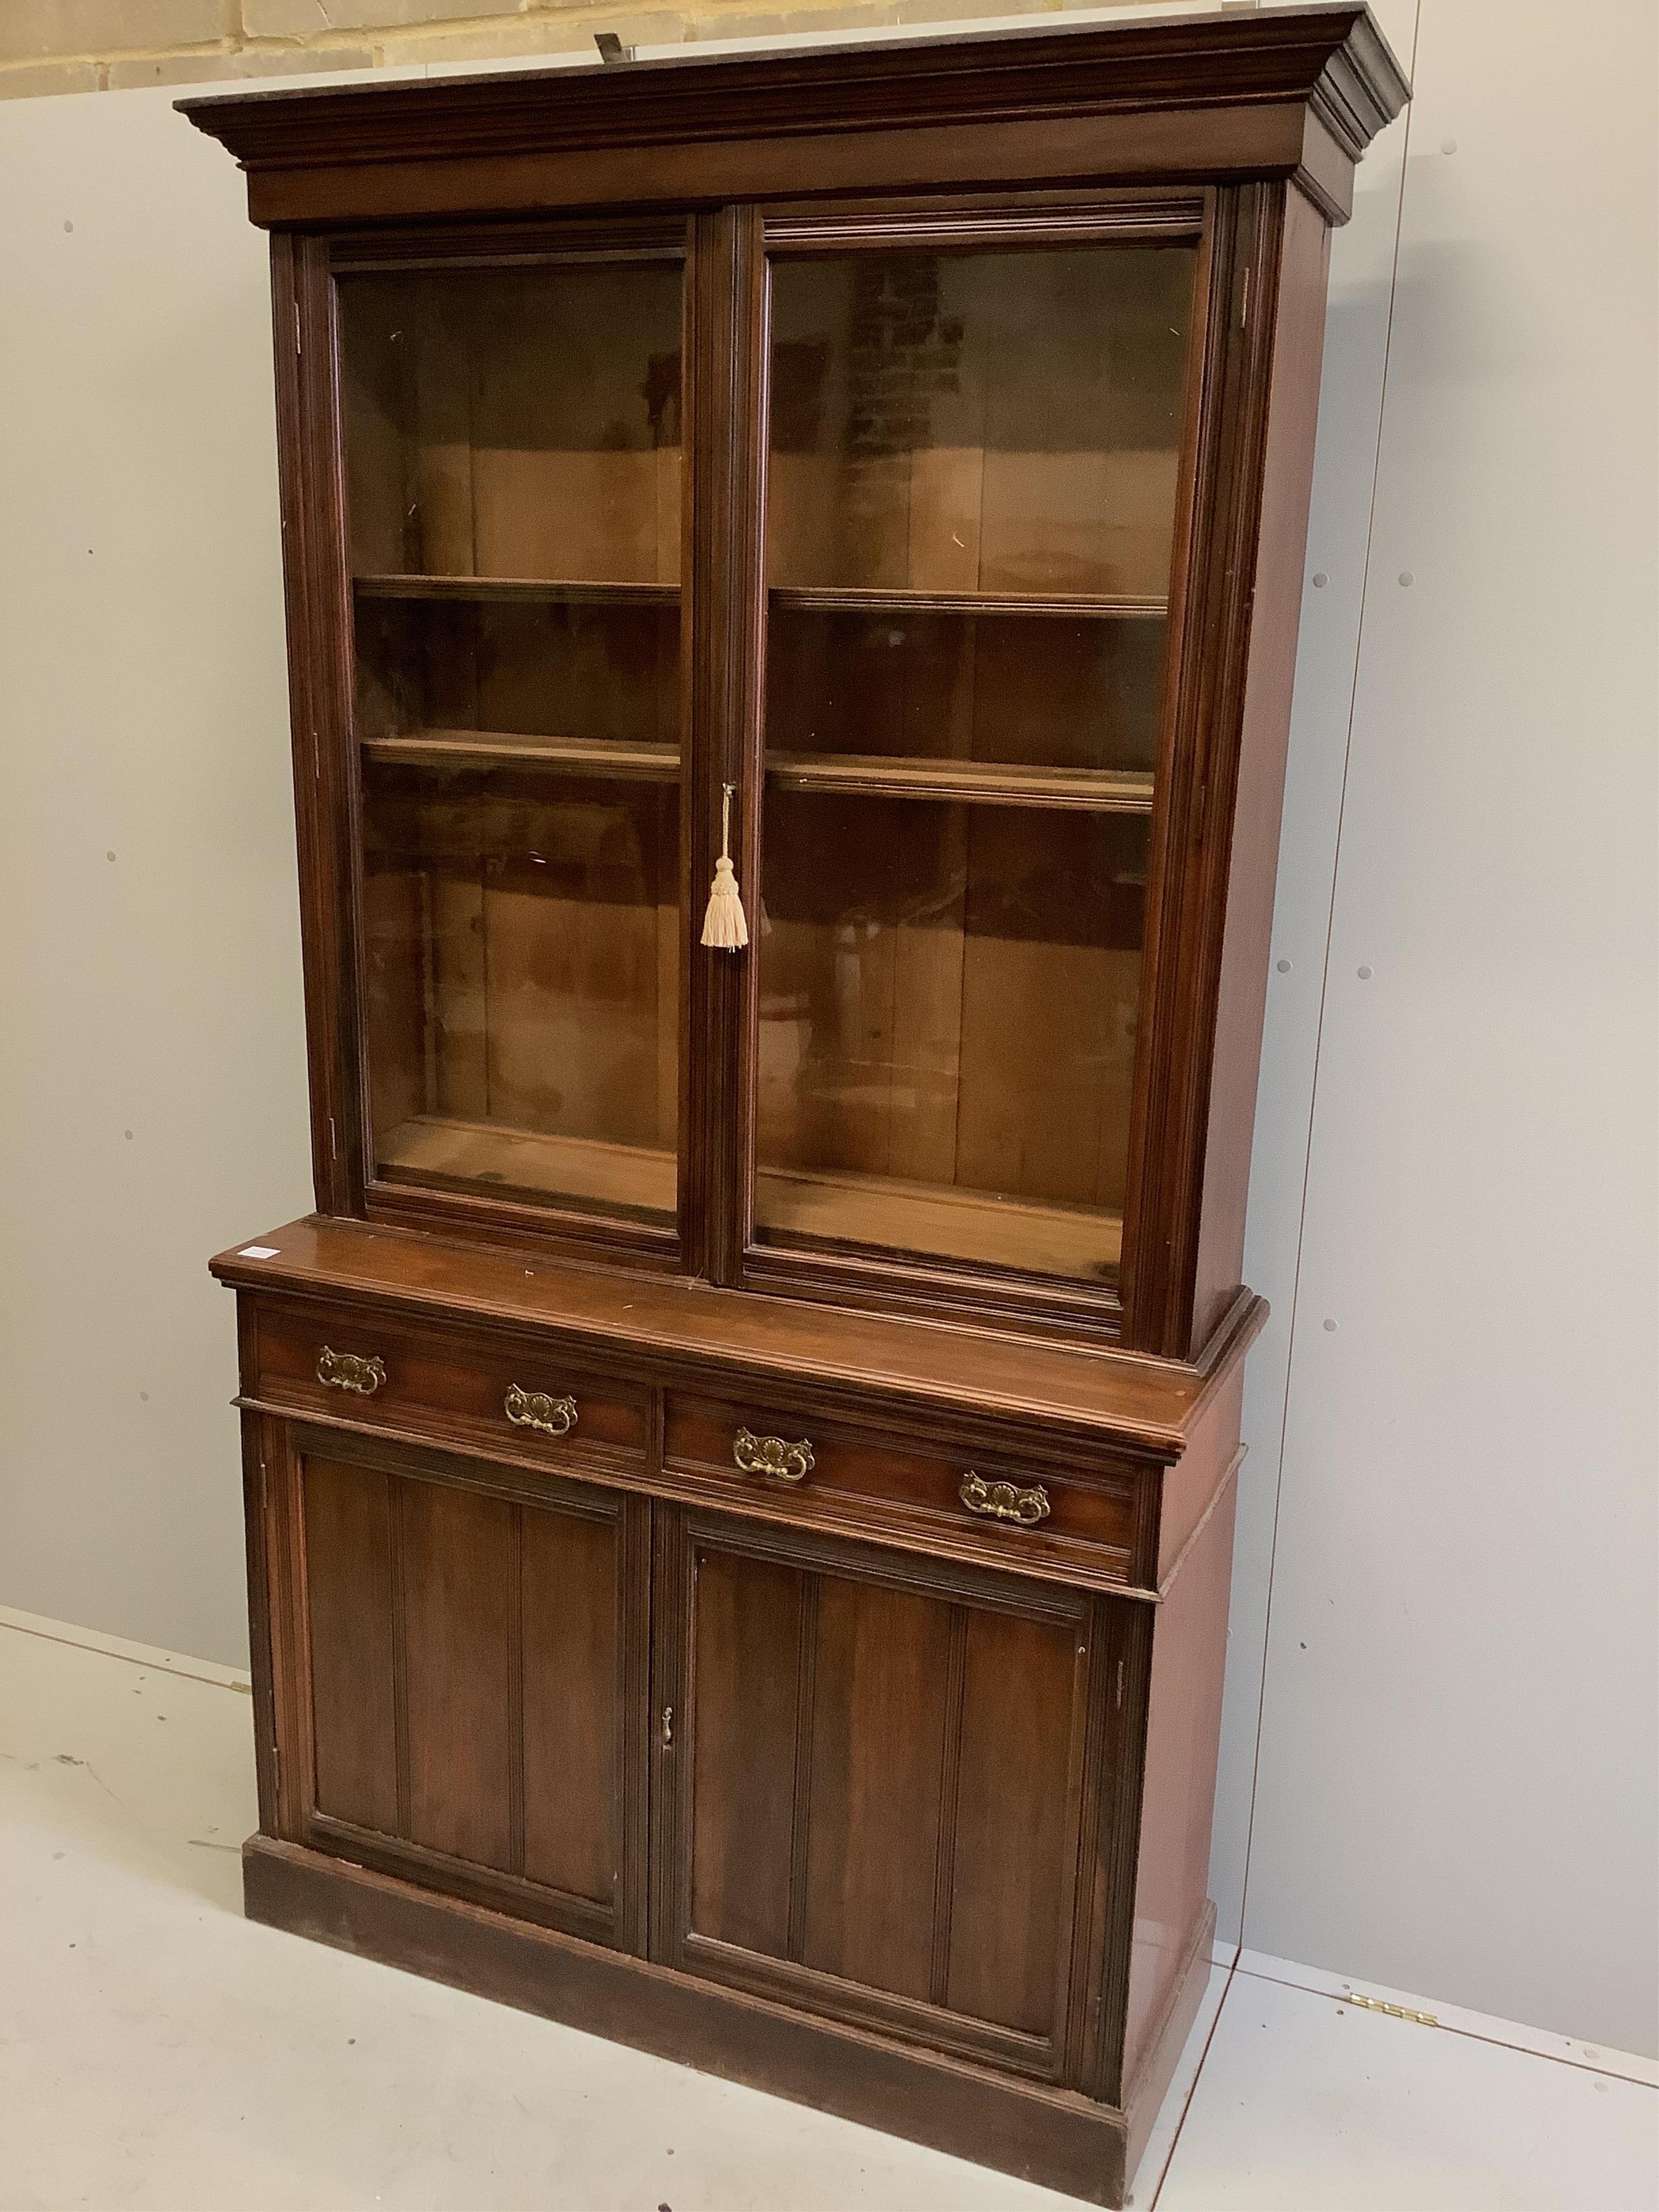 A late Victorian mahogany bookcase cabinet, width 122cm, depth 43cm, height 225cm. Condition - fair